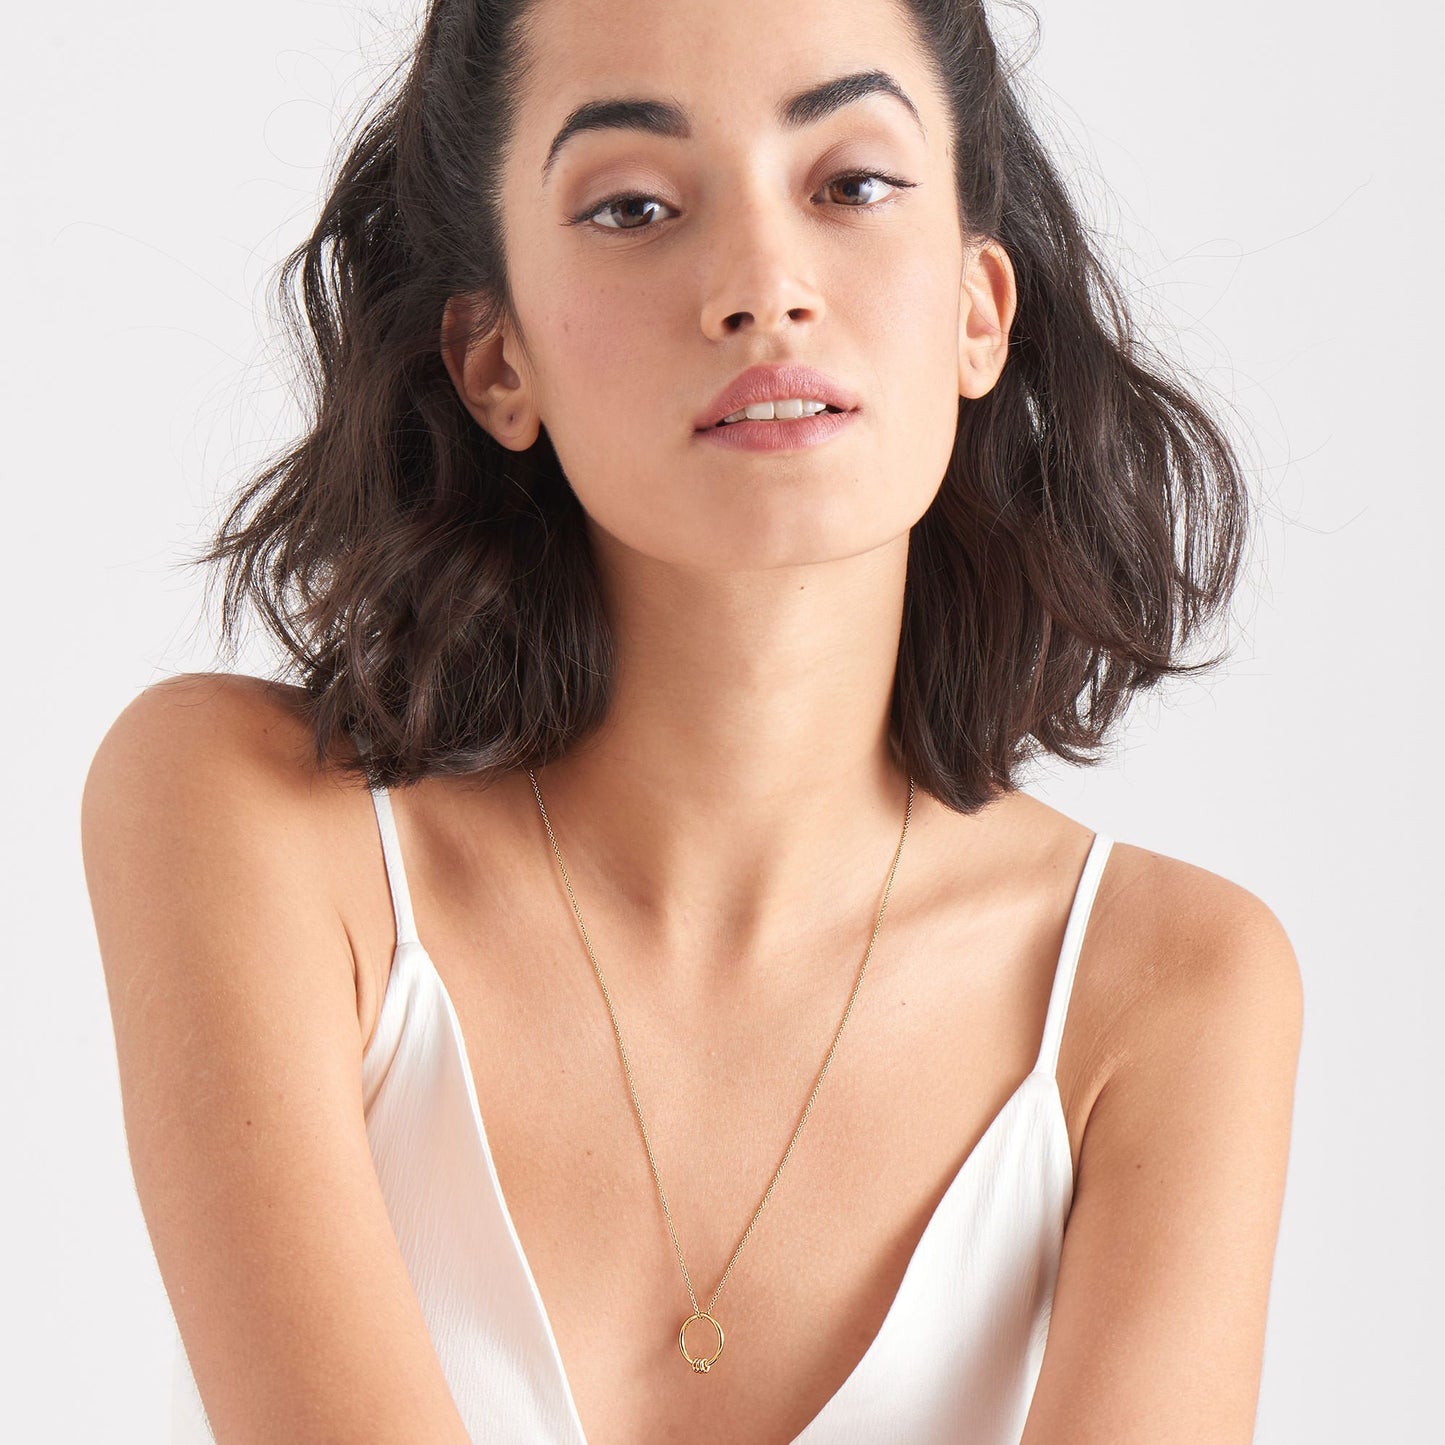 ANIA HAIE ANIA HAIE - Gold Modern Circle Necklace available at The Good Life Boutique